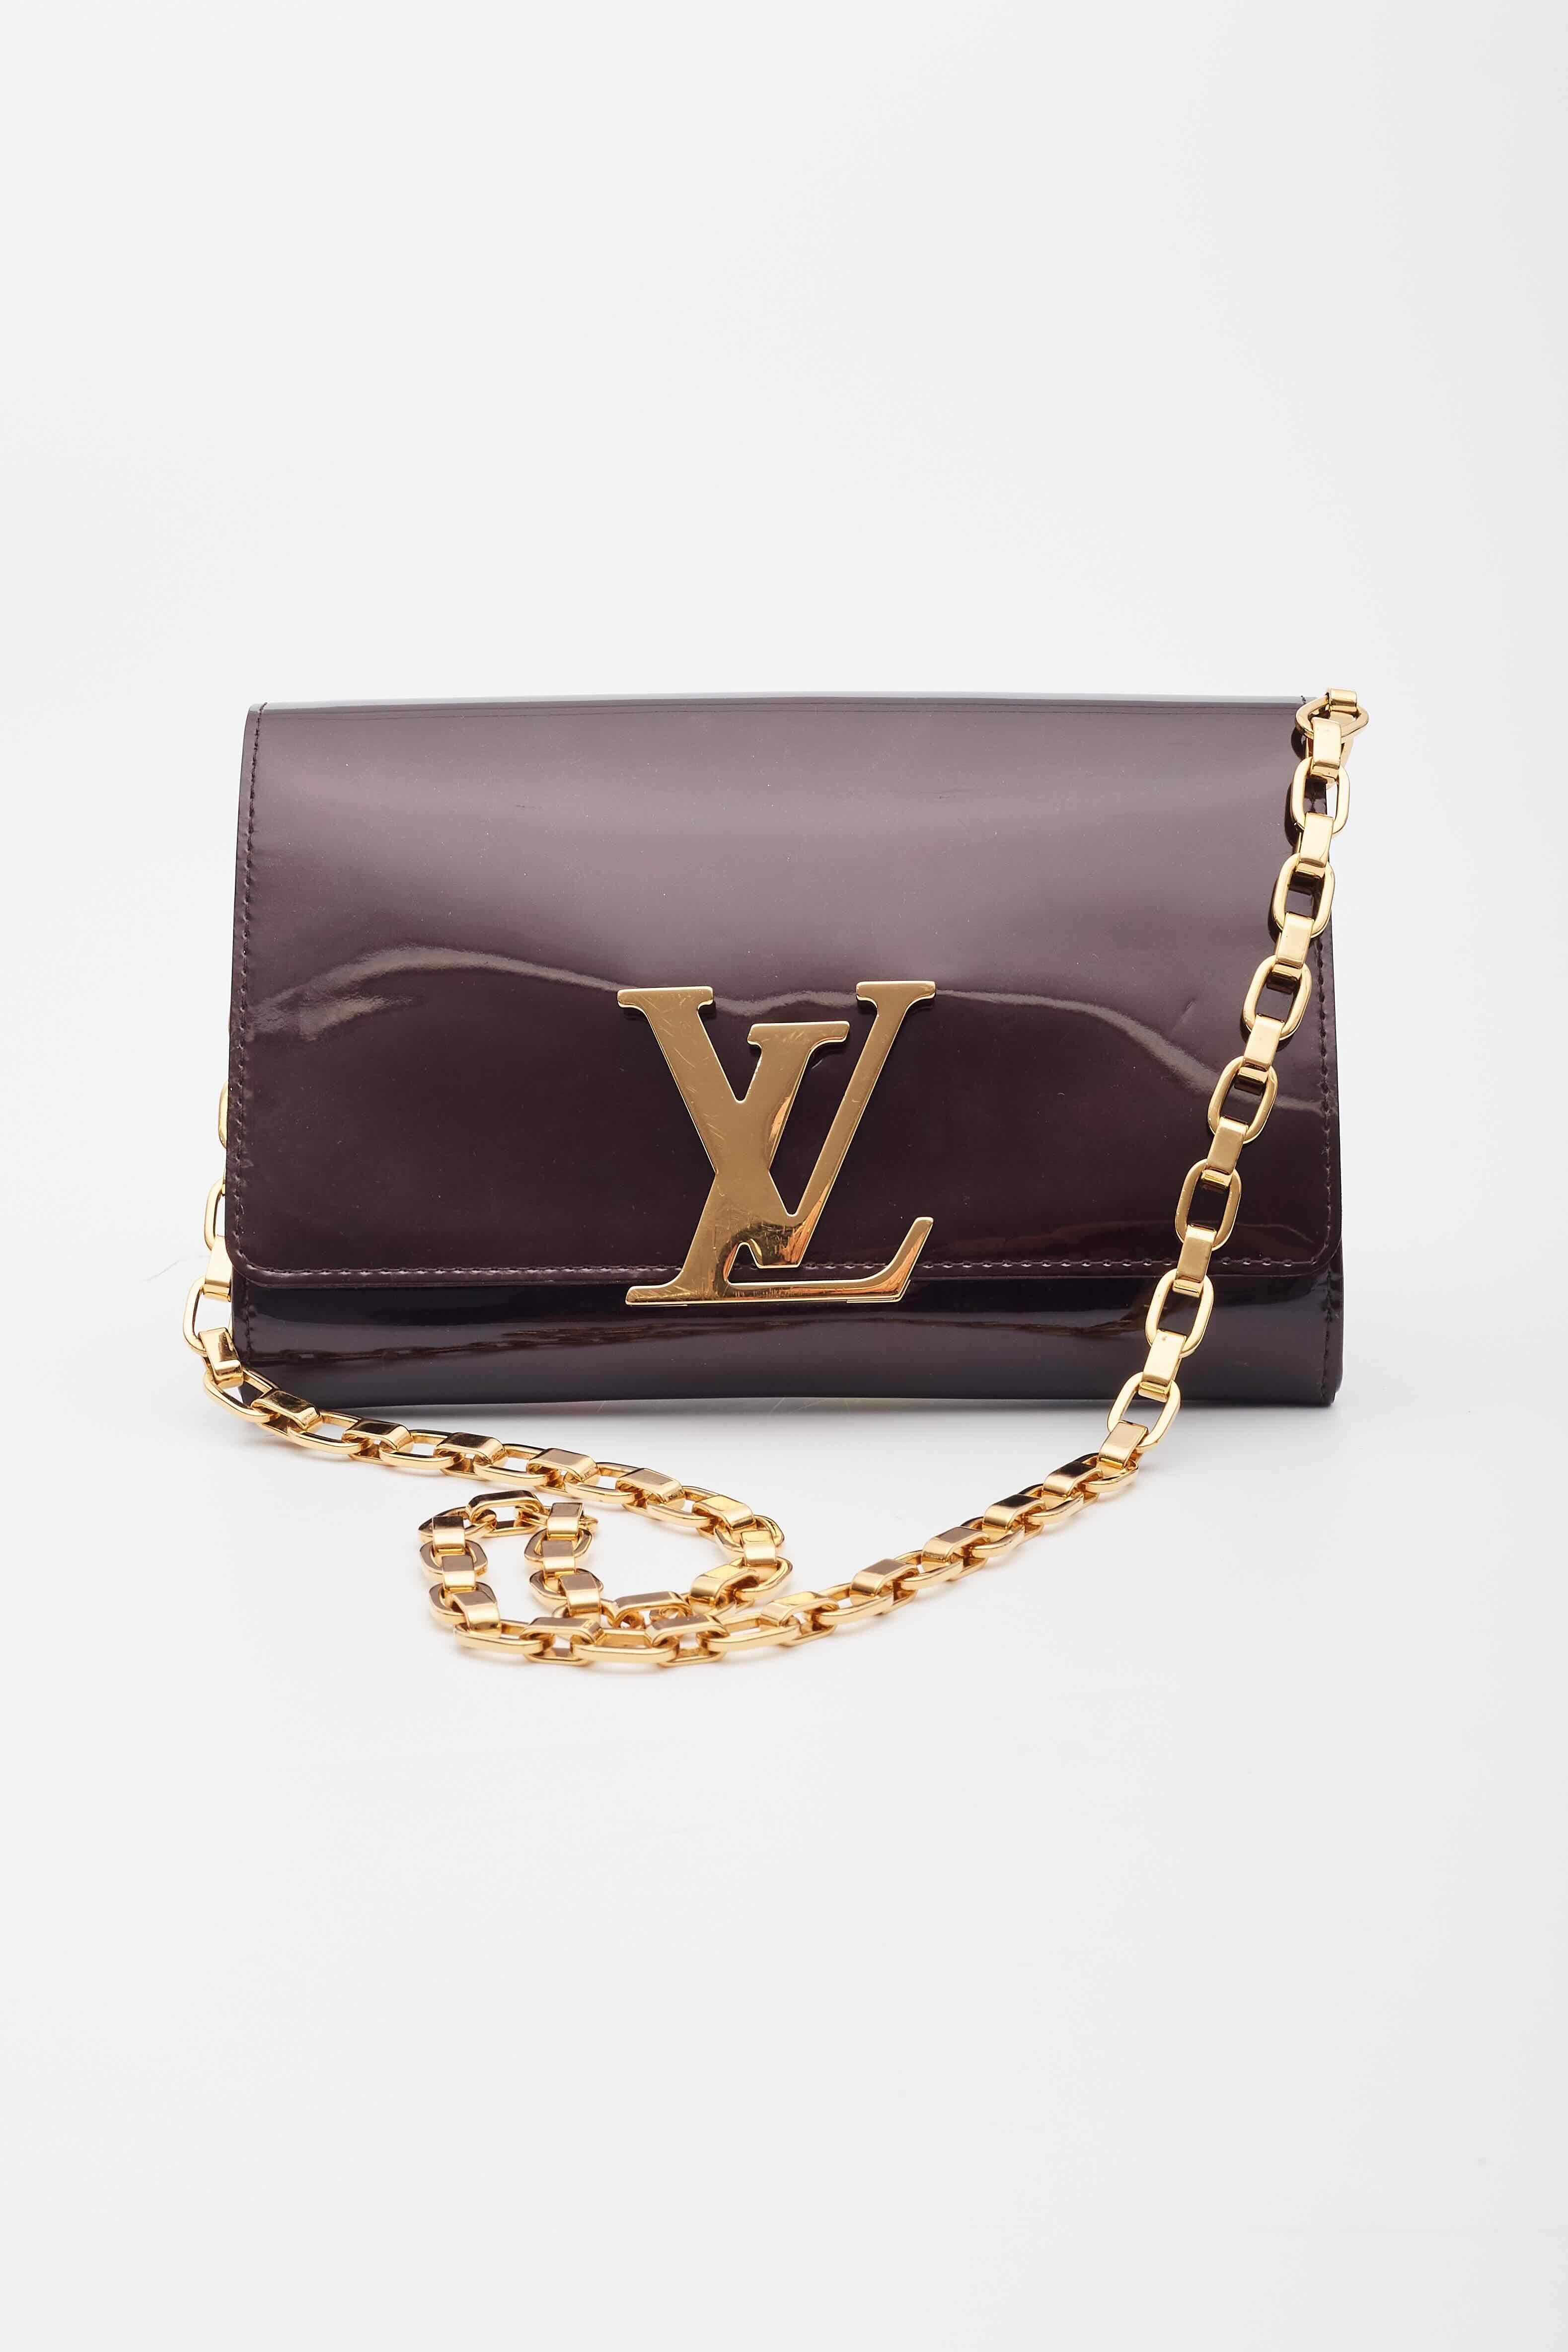 Louis Vuitton Vernis Leather Chain Louise GM Bag For Sale 5